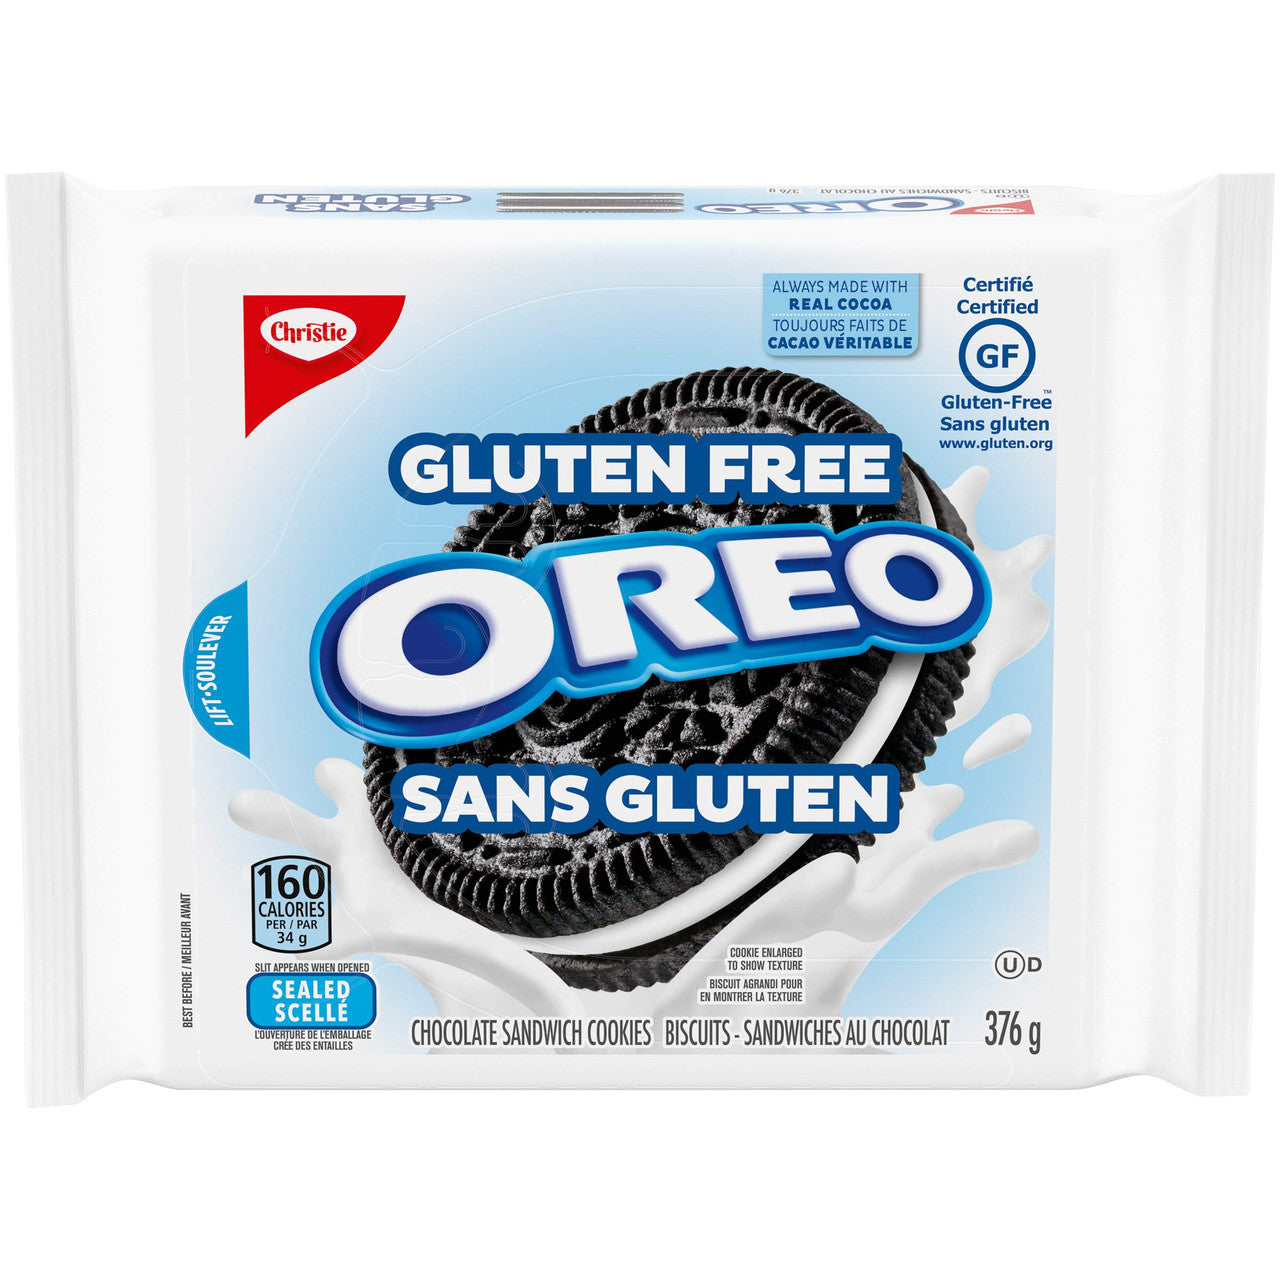 Christie Oreo, Gluten Free, Sandwich Cookies, 1 Pack, 376g/13.3 oz., {Imported from Canada}